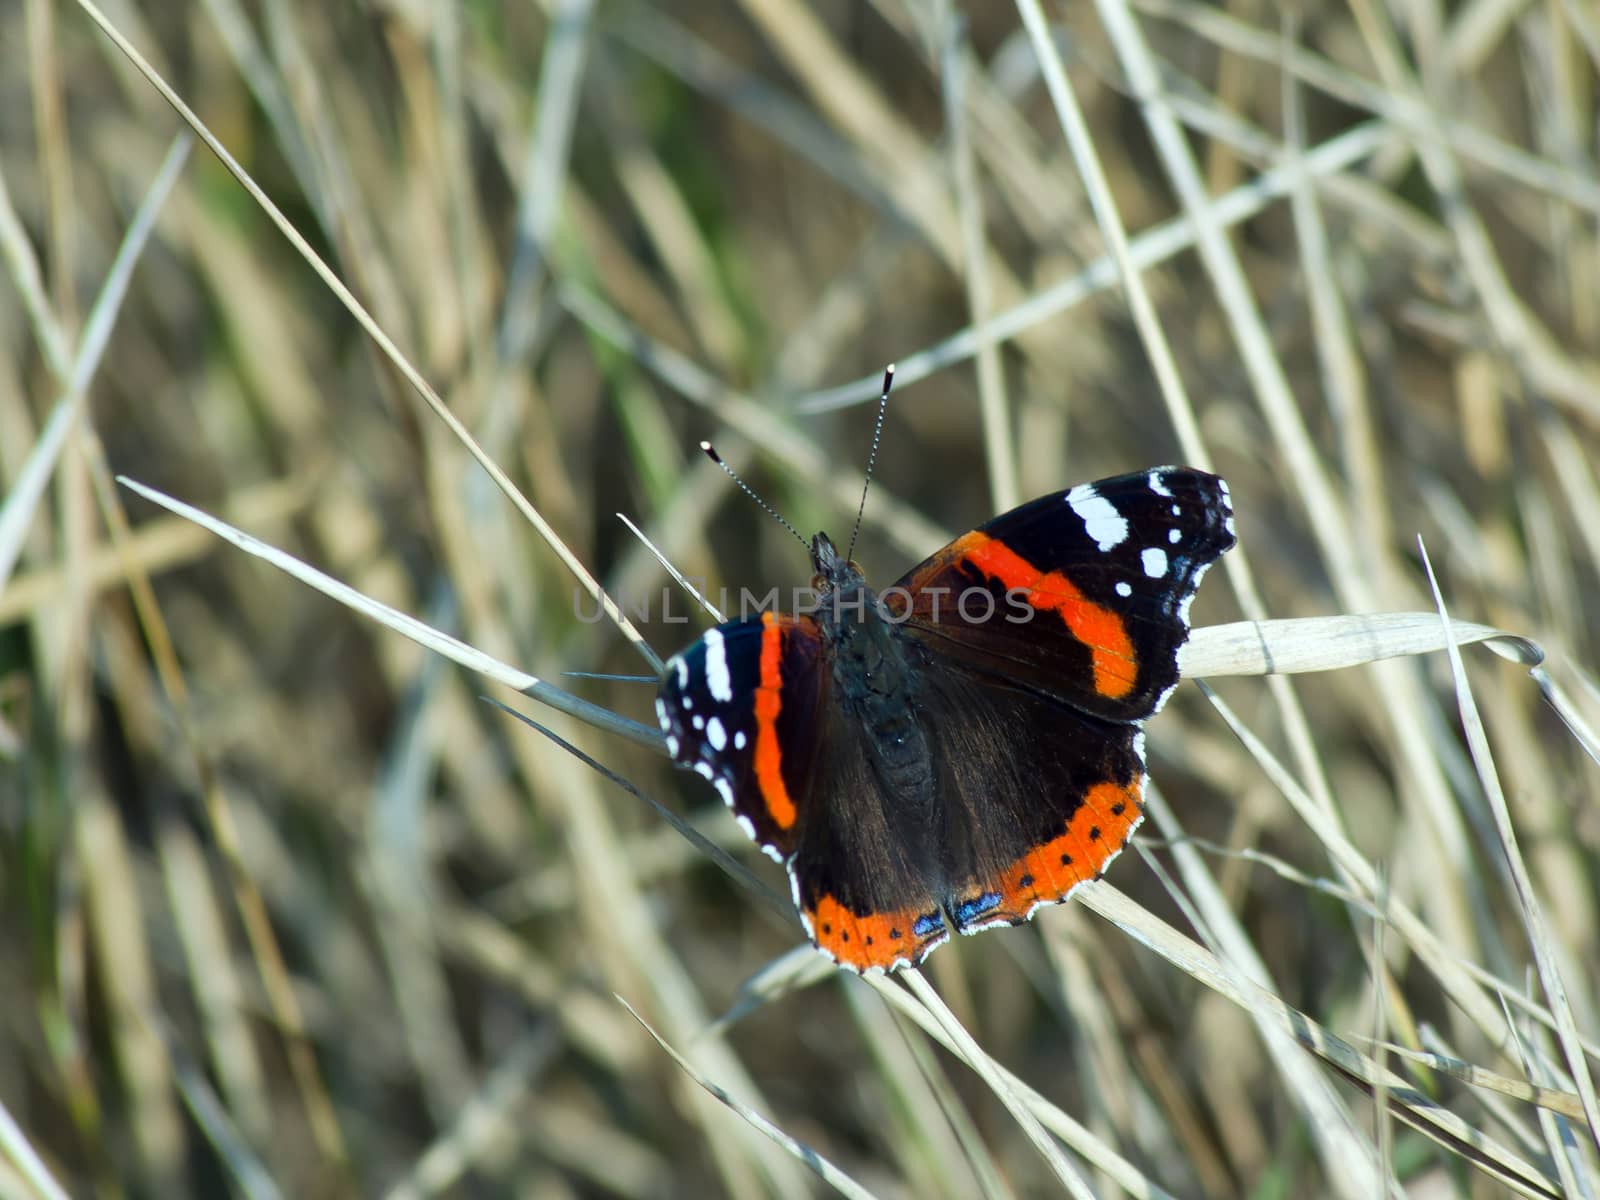 The admiral butterfly (Vanessa Atalanta) of dry grass
.